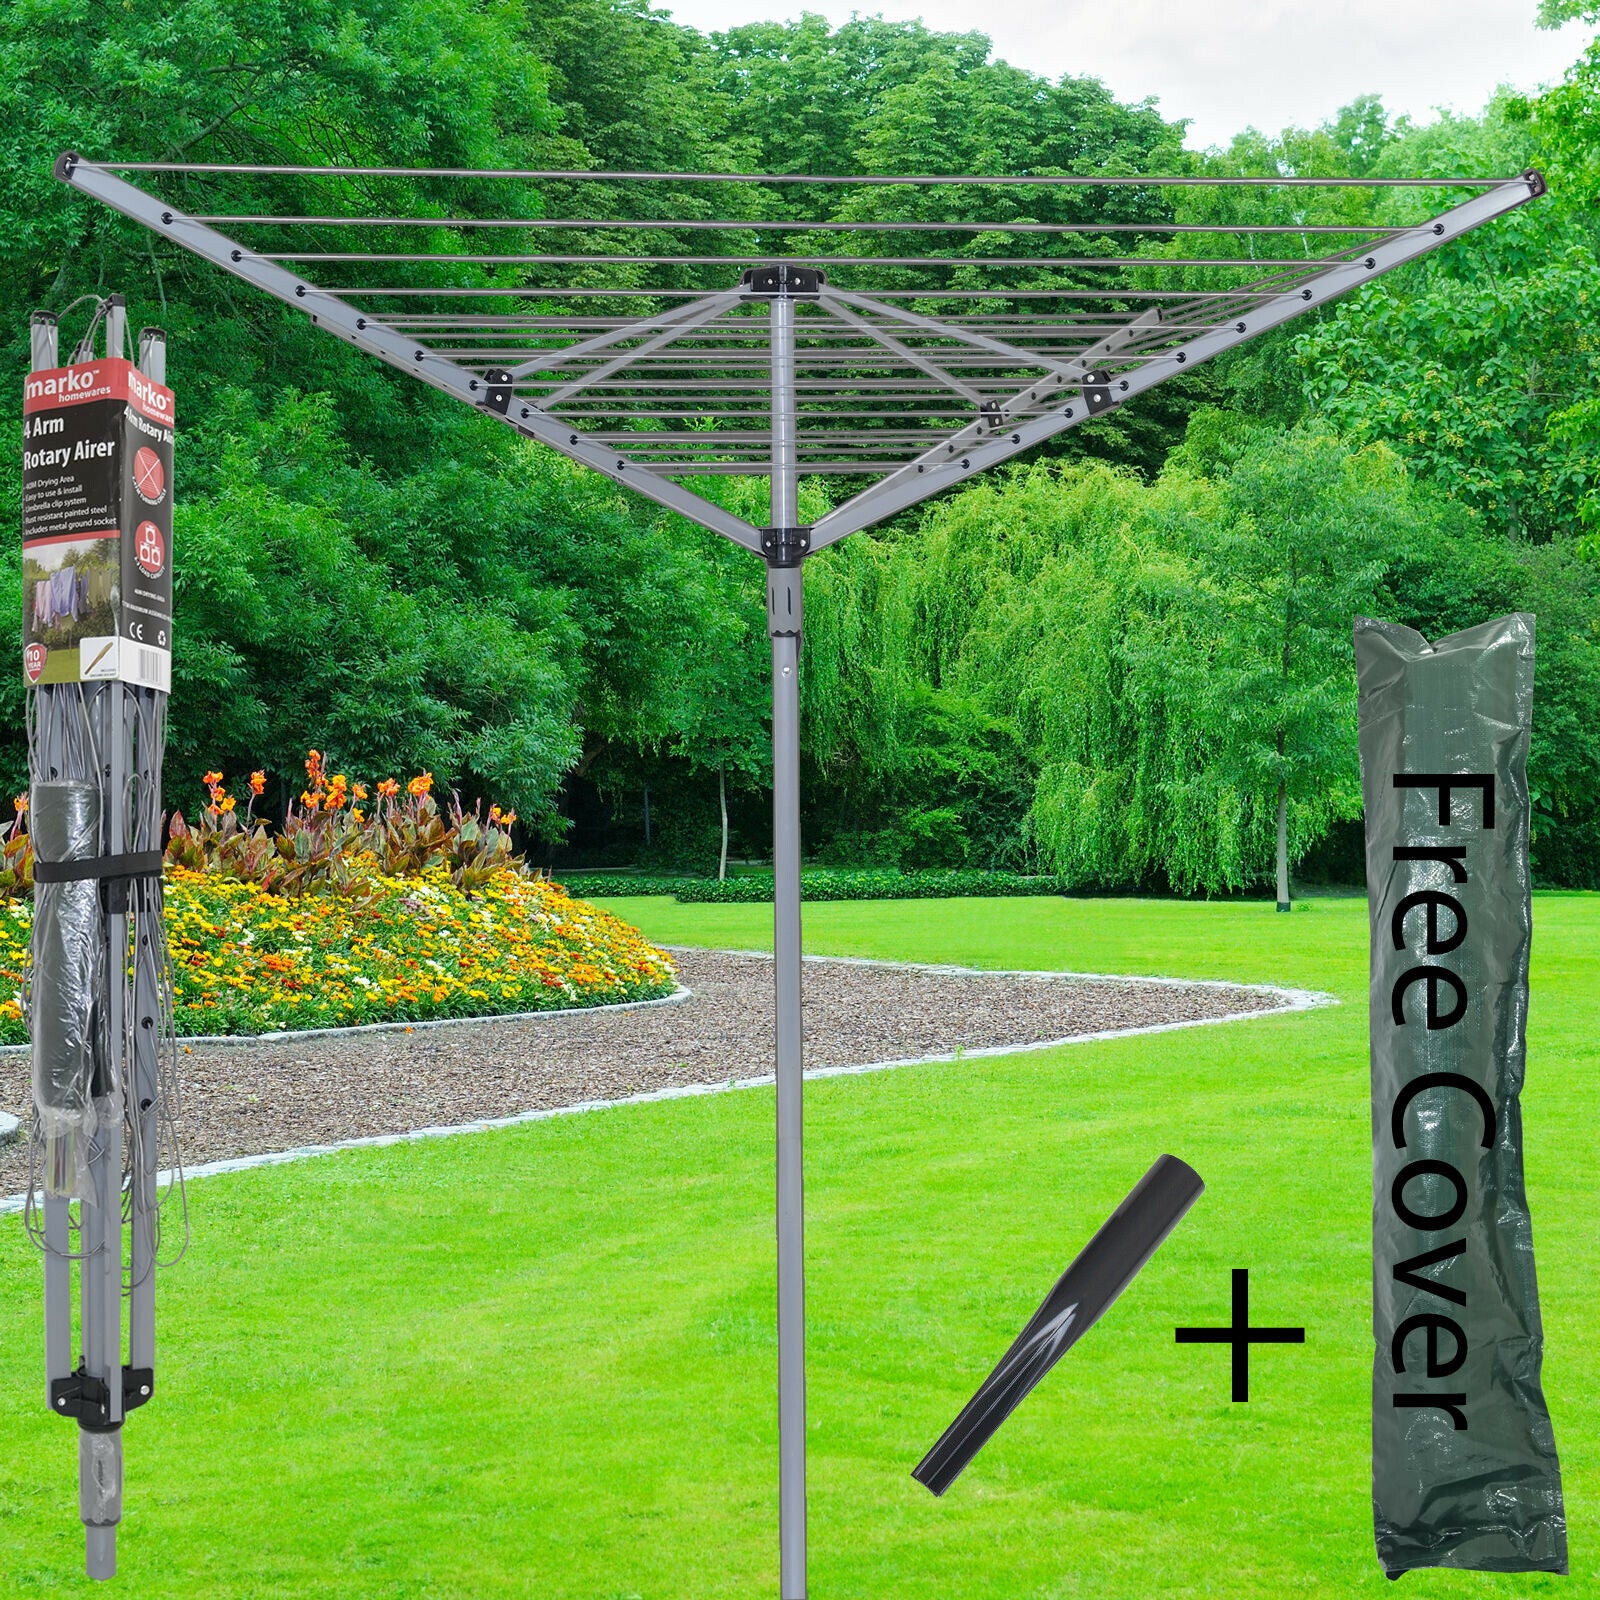 4 Arm 40M Rotary Airer Clothes Dryer Outdoor Laundry Washing Line